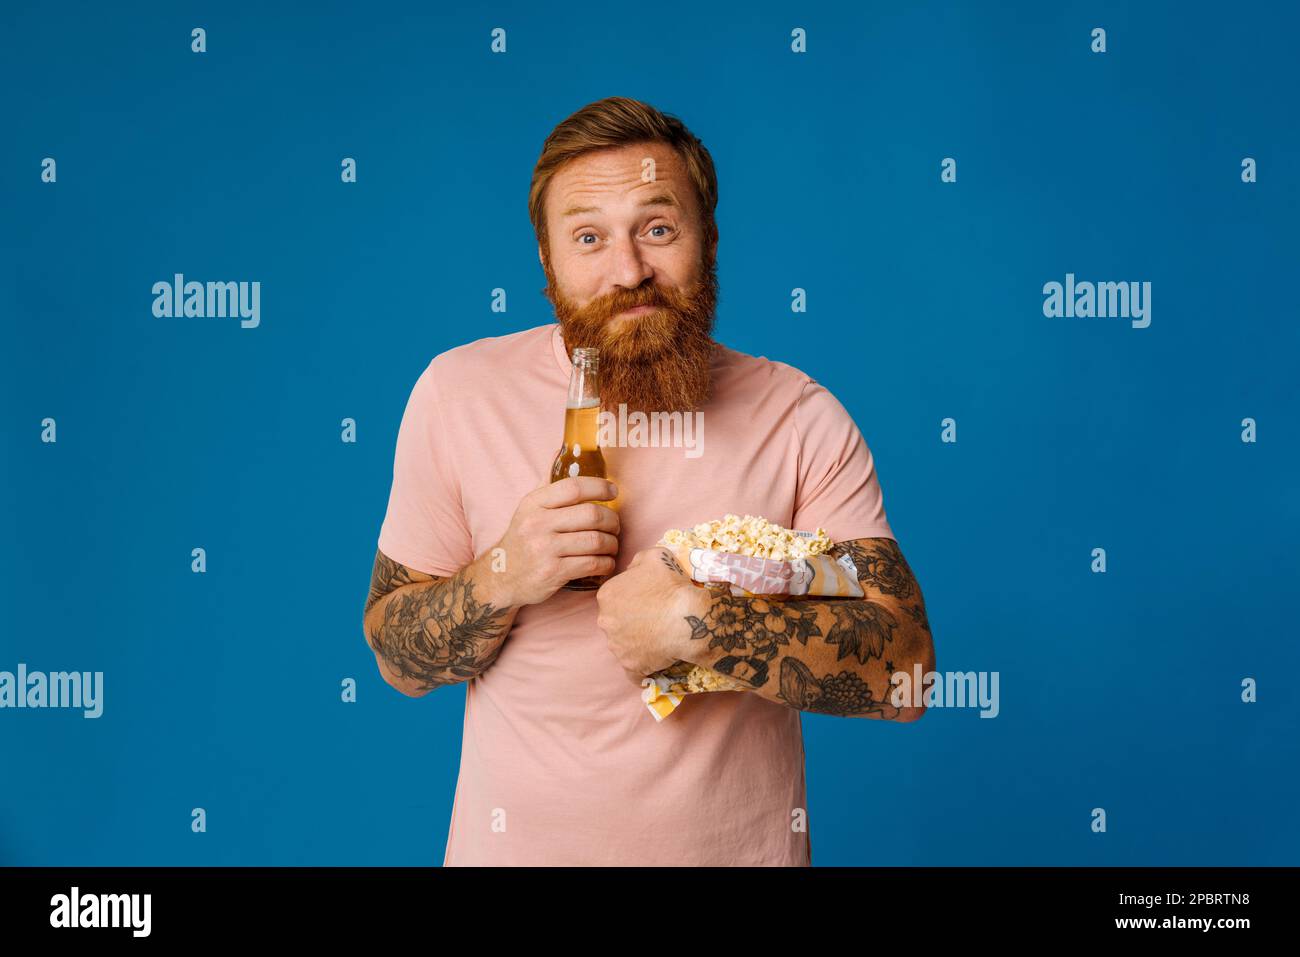 Pleased ginger bearded man holding beer and popcorn while standing isolated over blue studio background Stock Photo